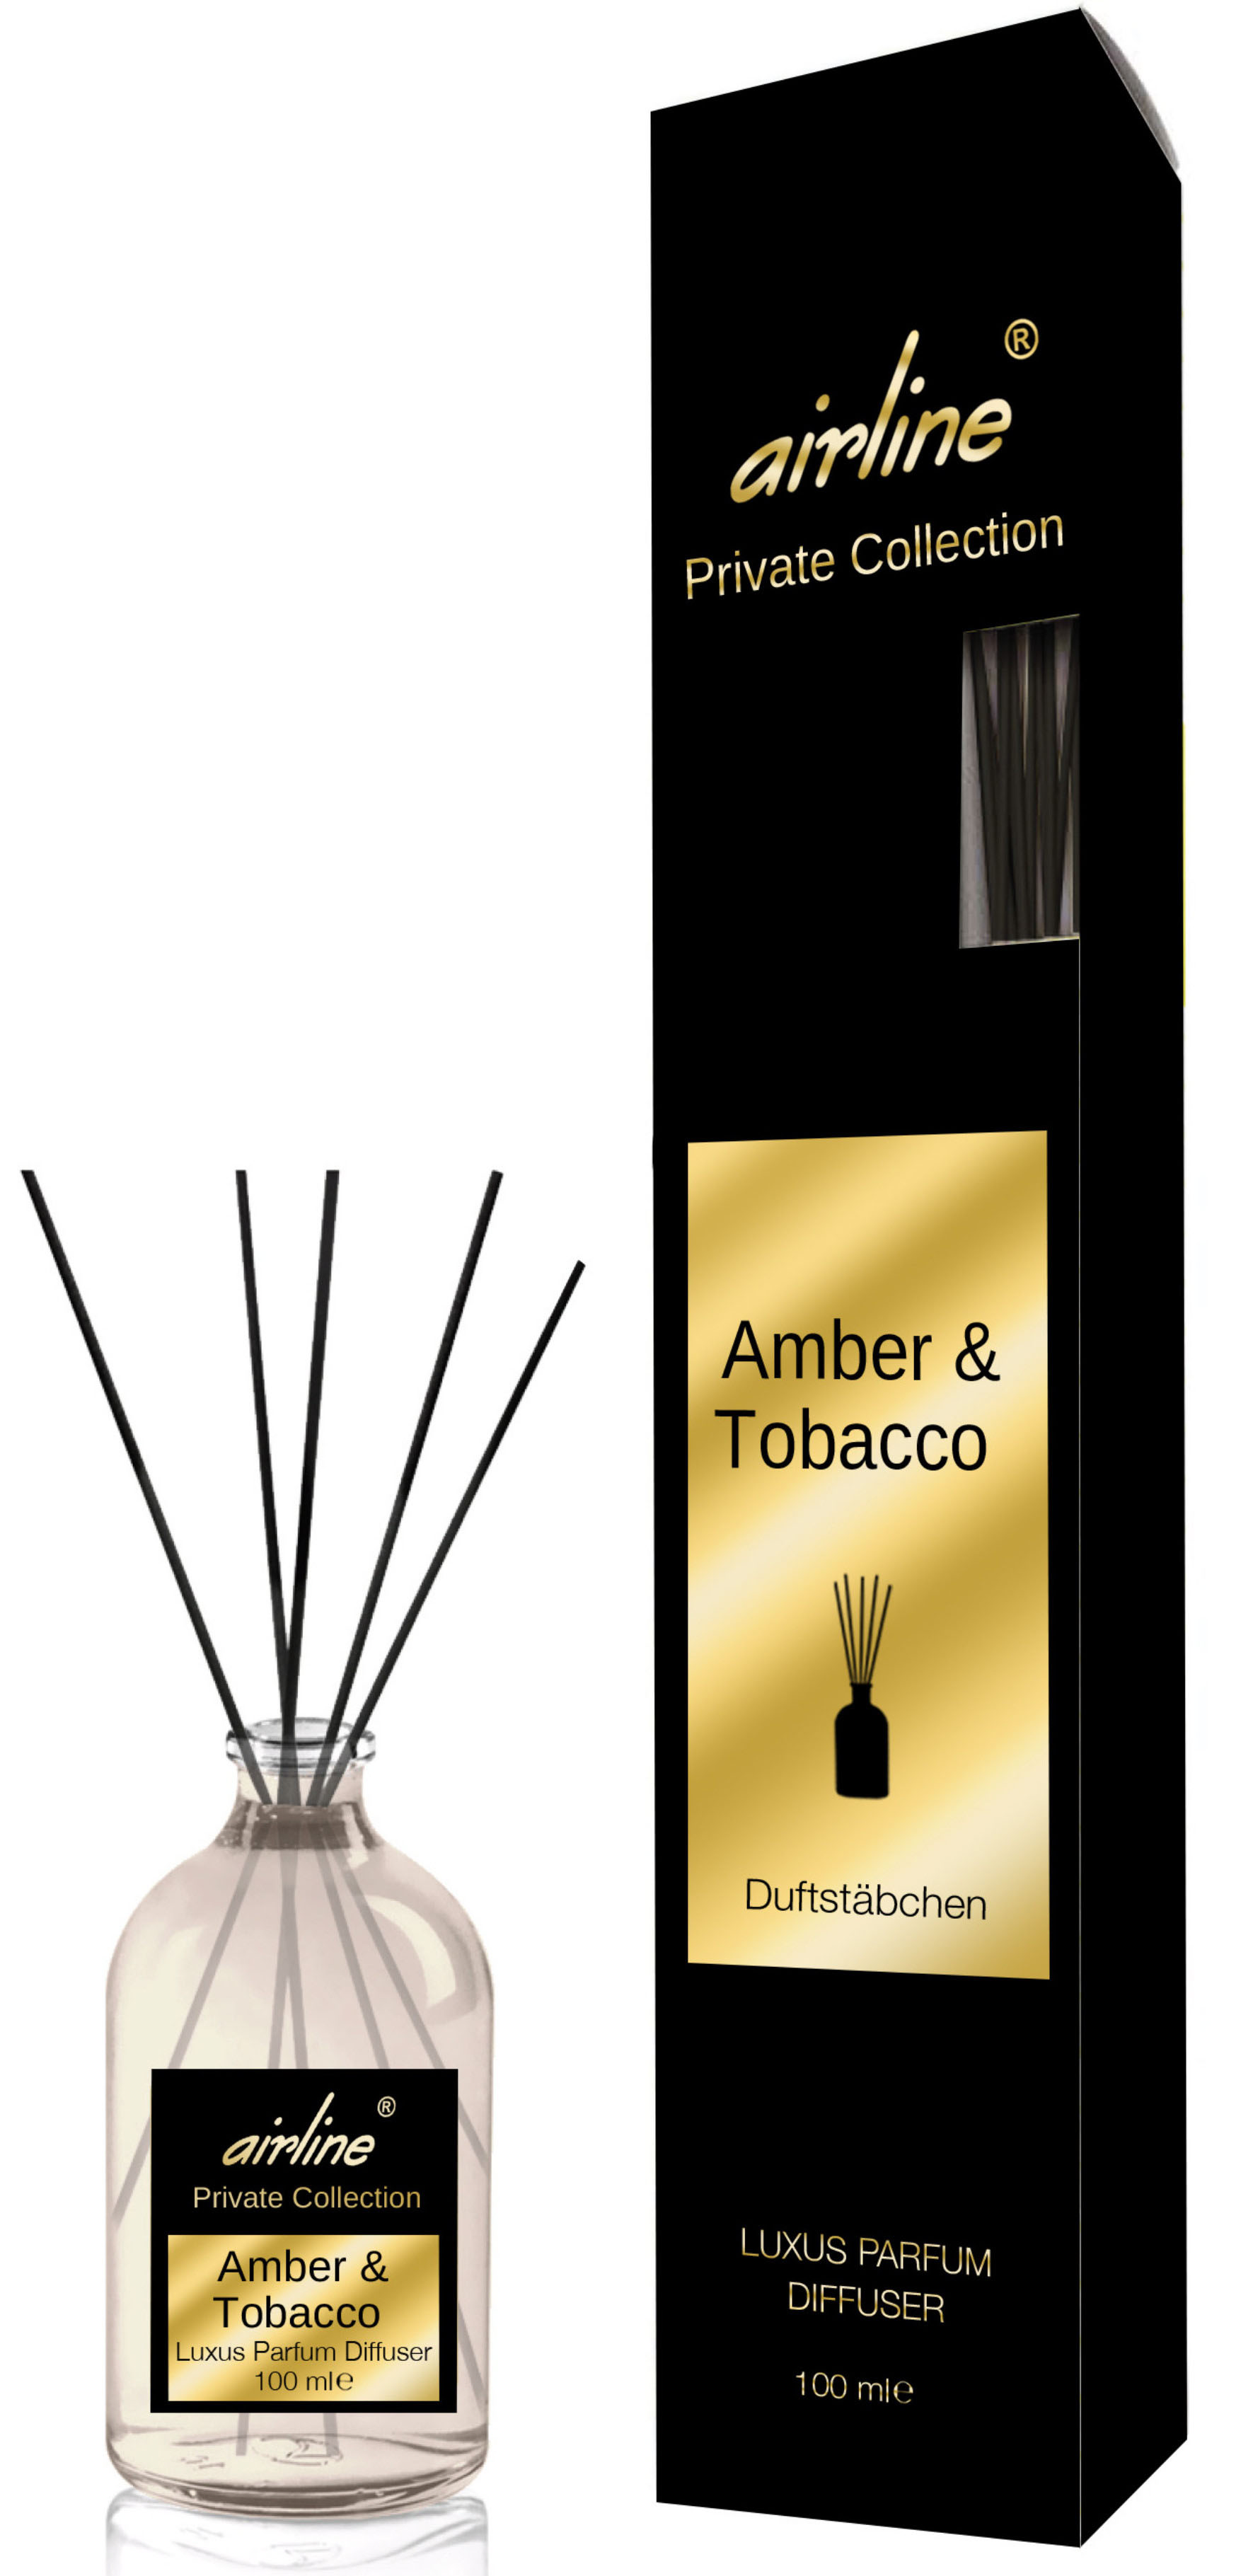 00499 - airline Private Collection Duftstäbchen 100ml- Amber & Tobacco